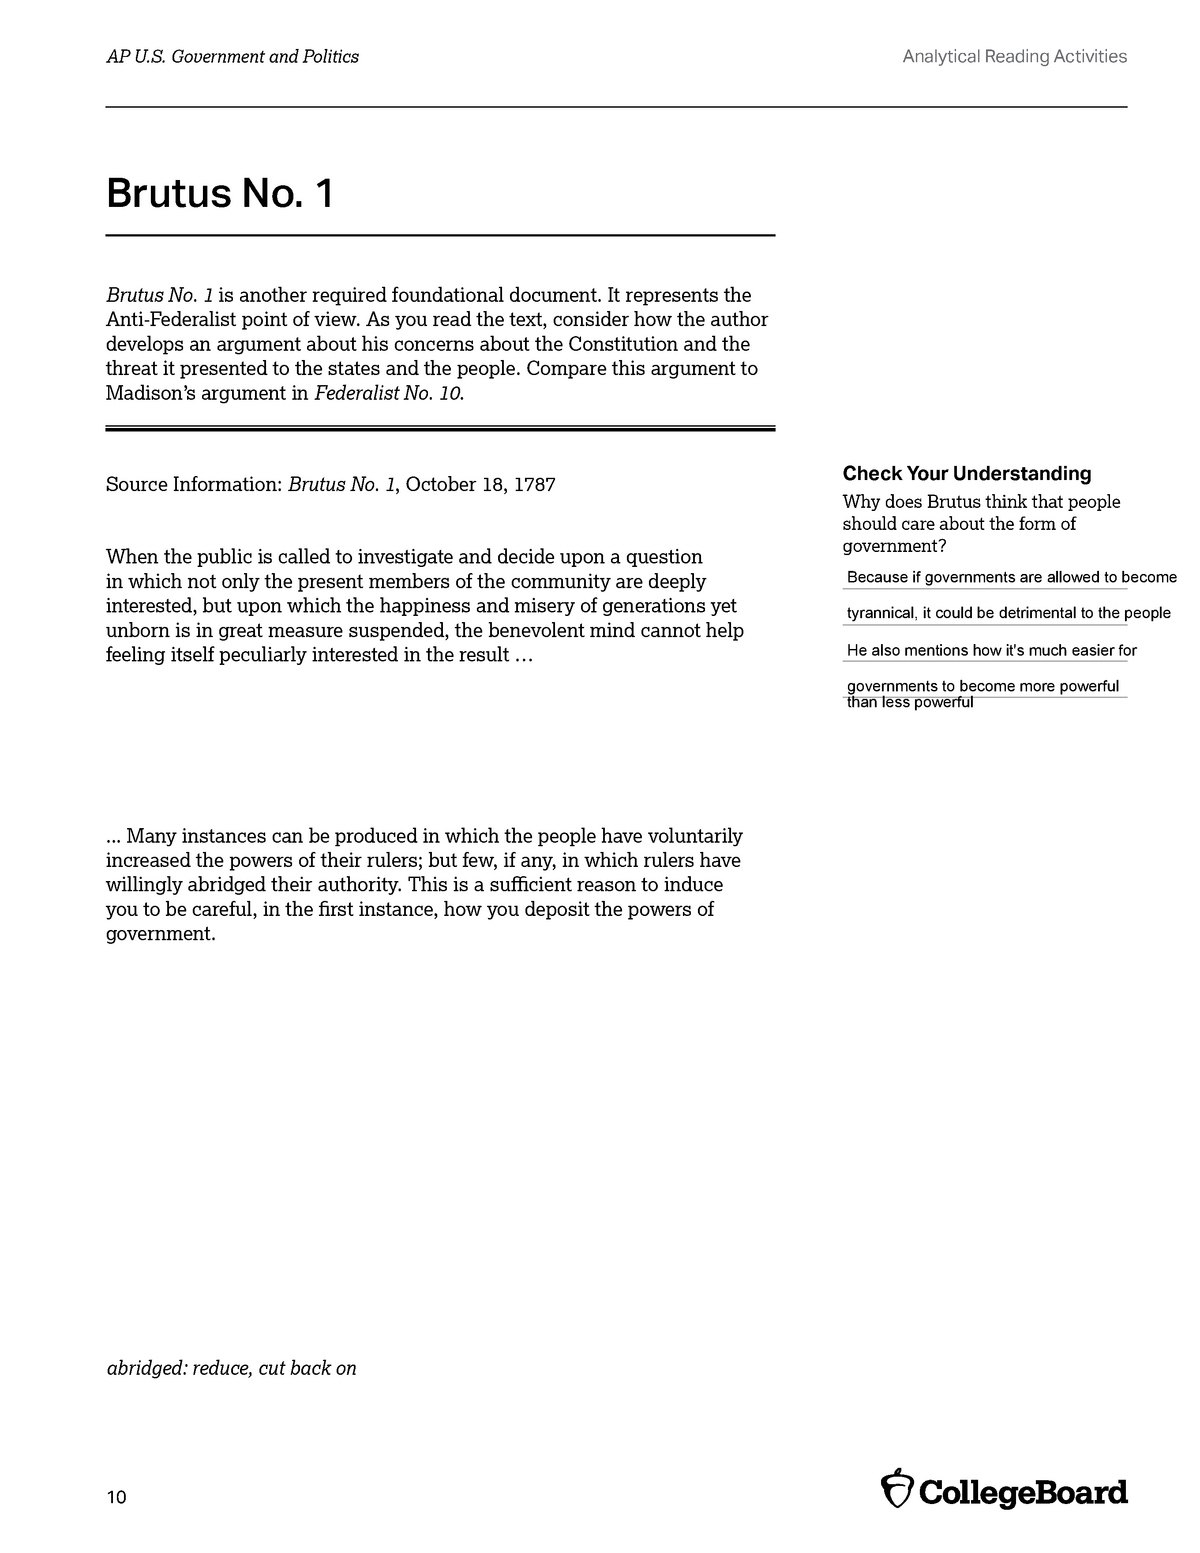 thesis for brutus 1